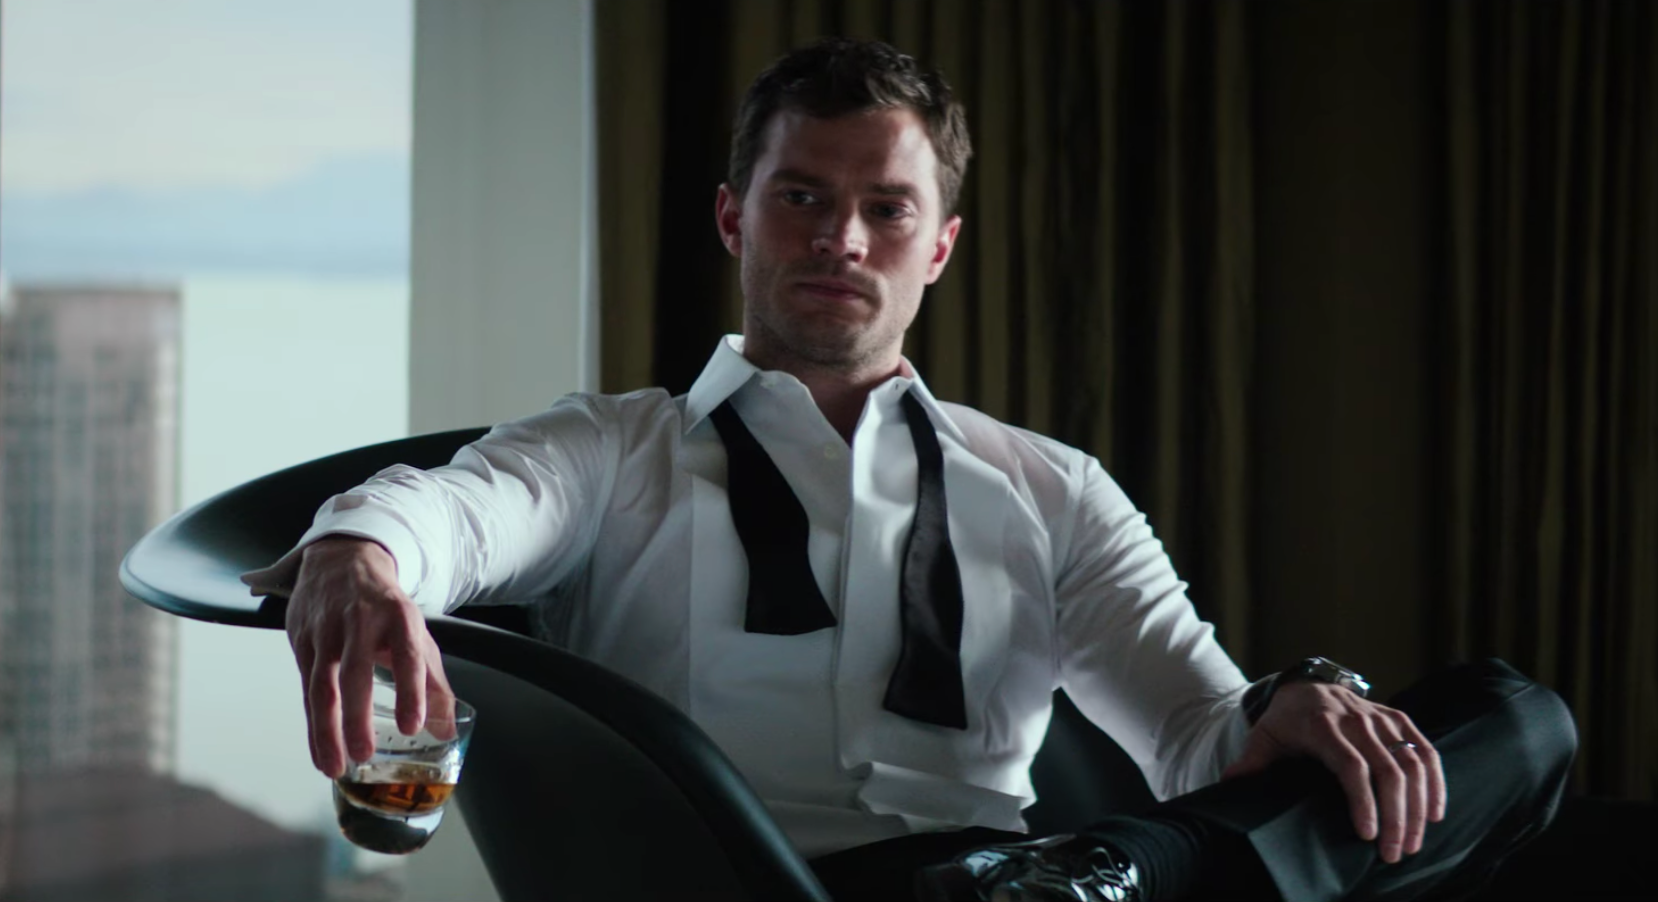 Christian Grey From 50 Shades of Grey